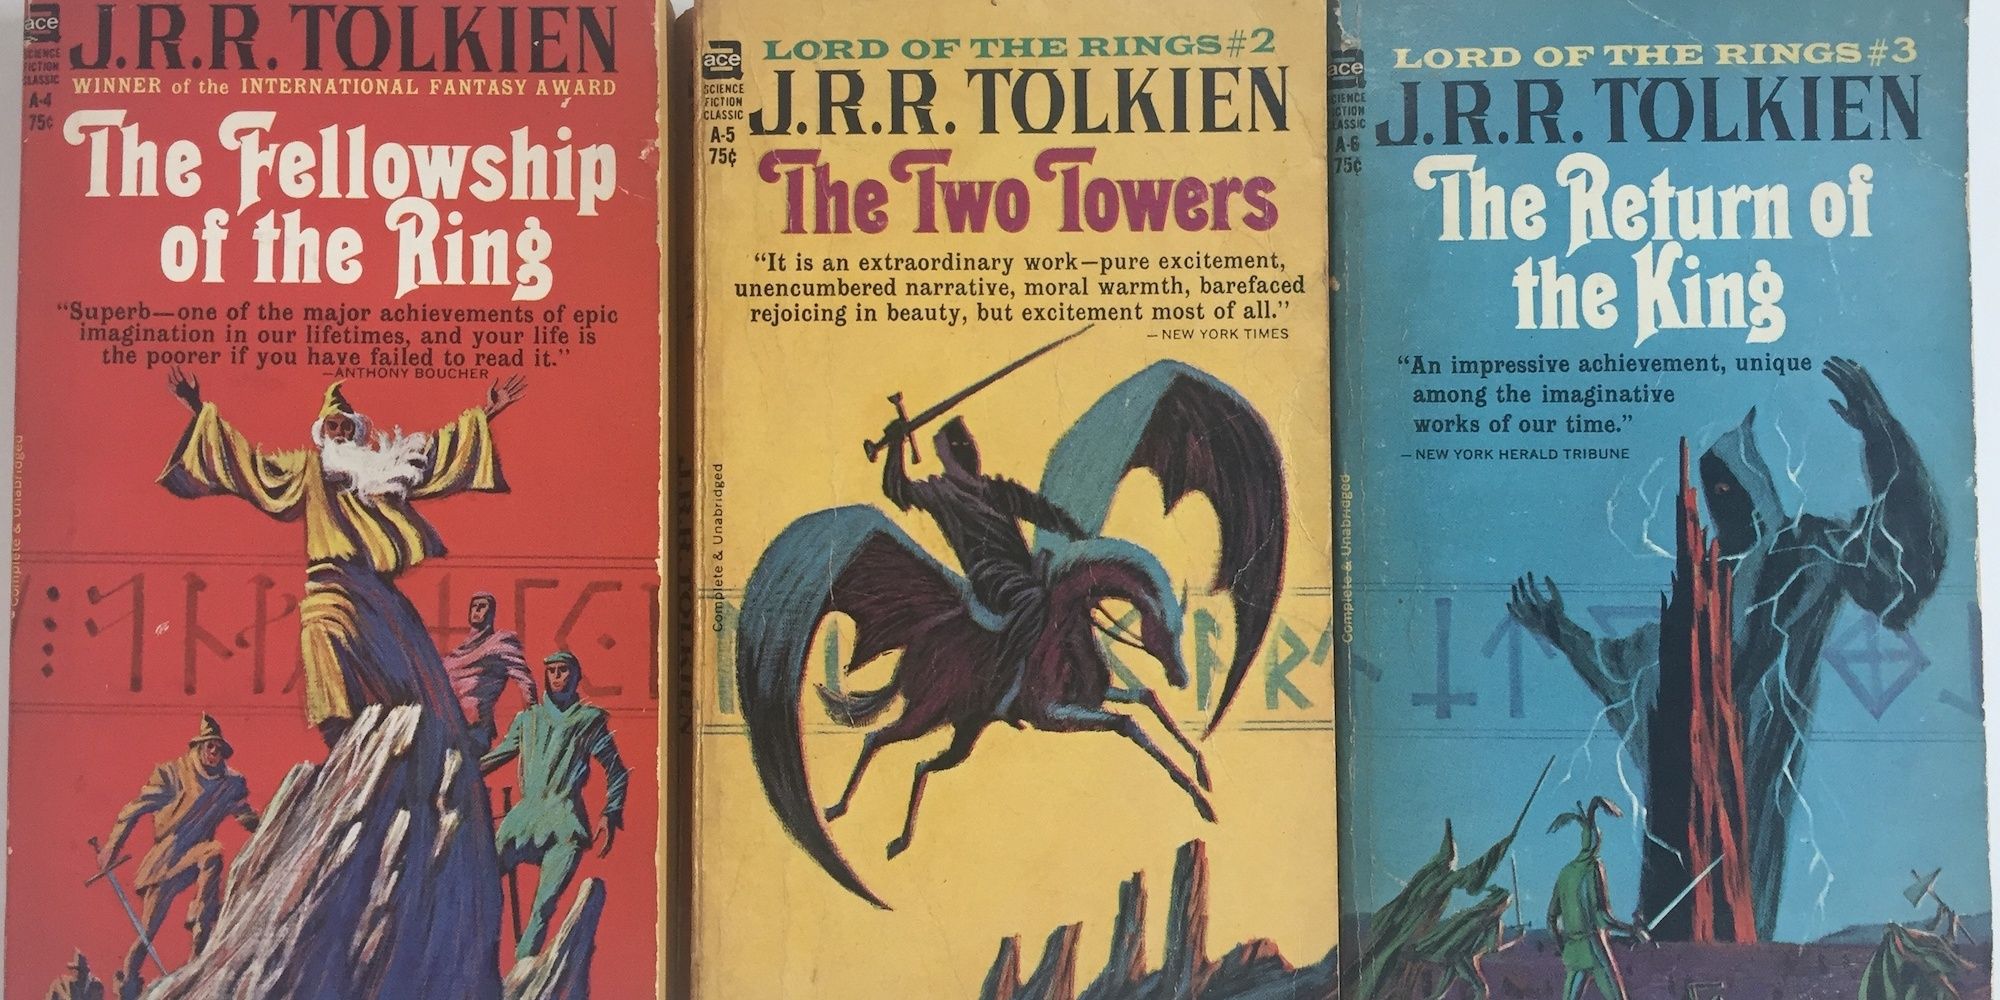 Lord of the Rings books